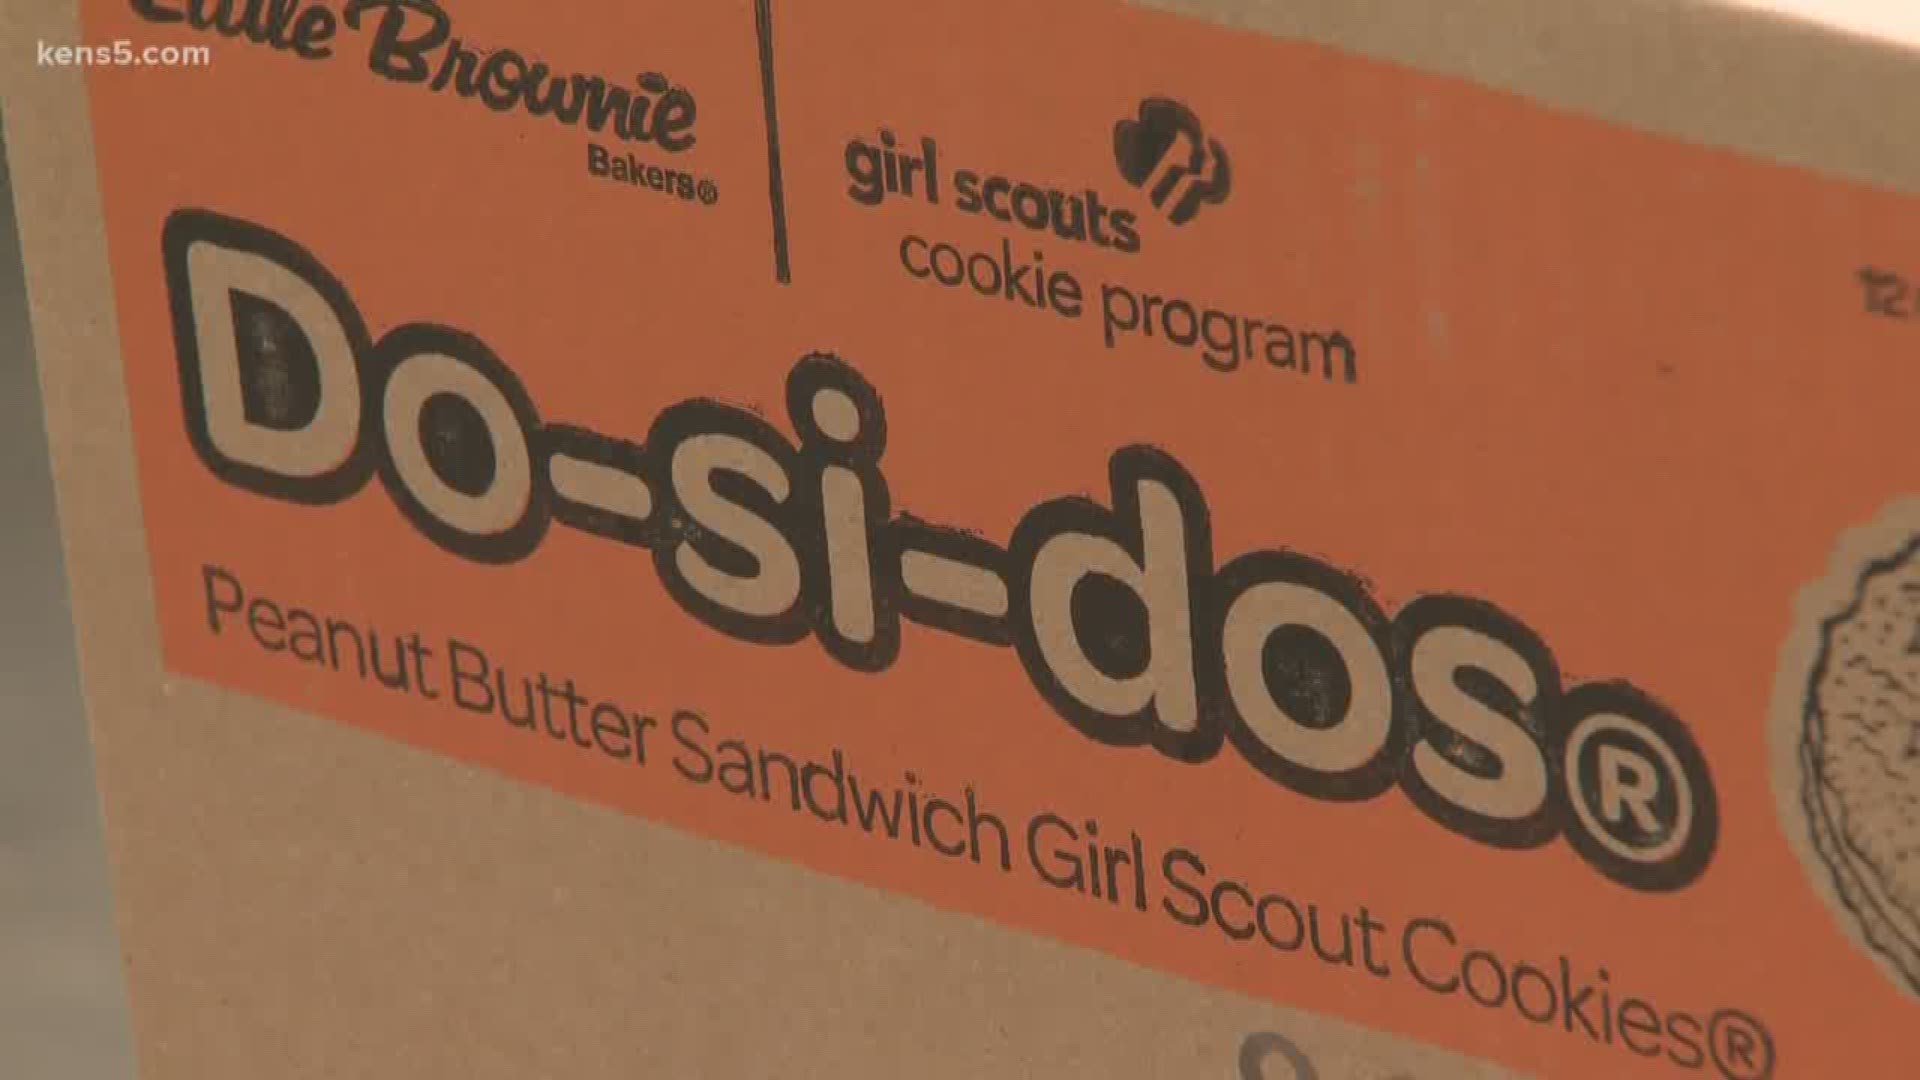 It's the day Girl Scout cookies fans have been waiting for. Wednesday is what the scouts call cookie drop, when millions of Girl Scout cookies arrive in San Antonio.